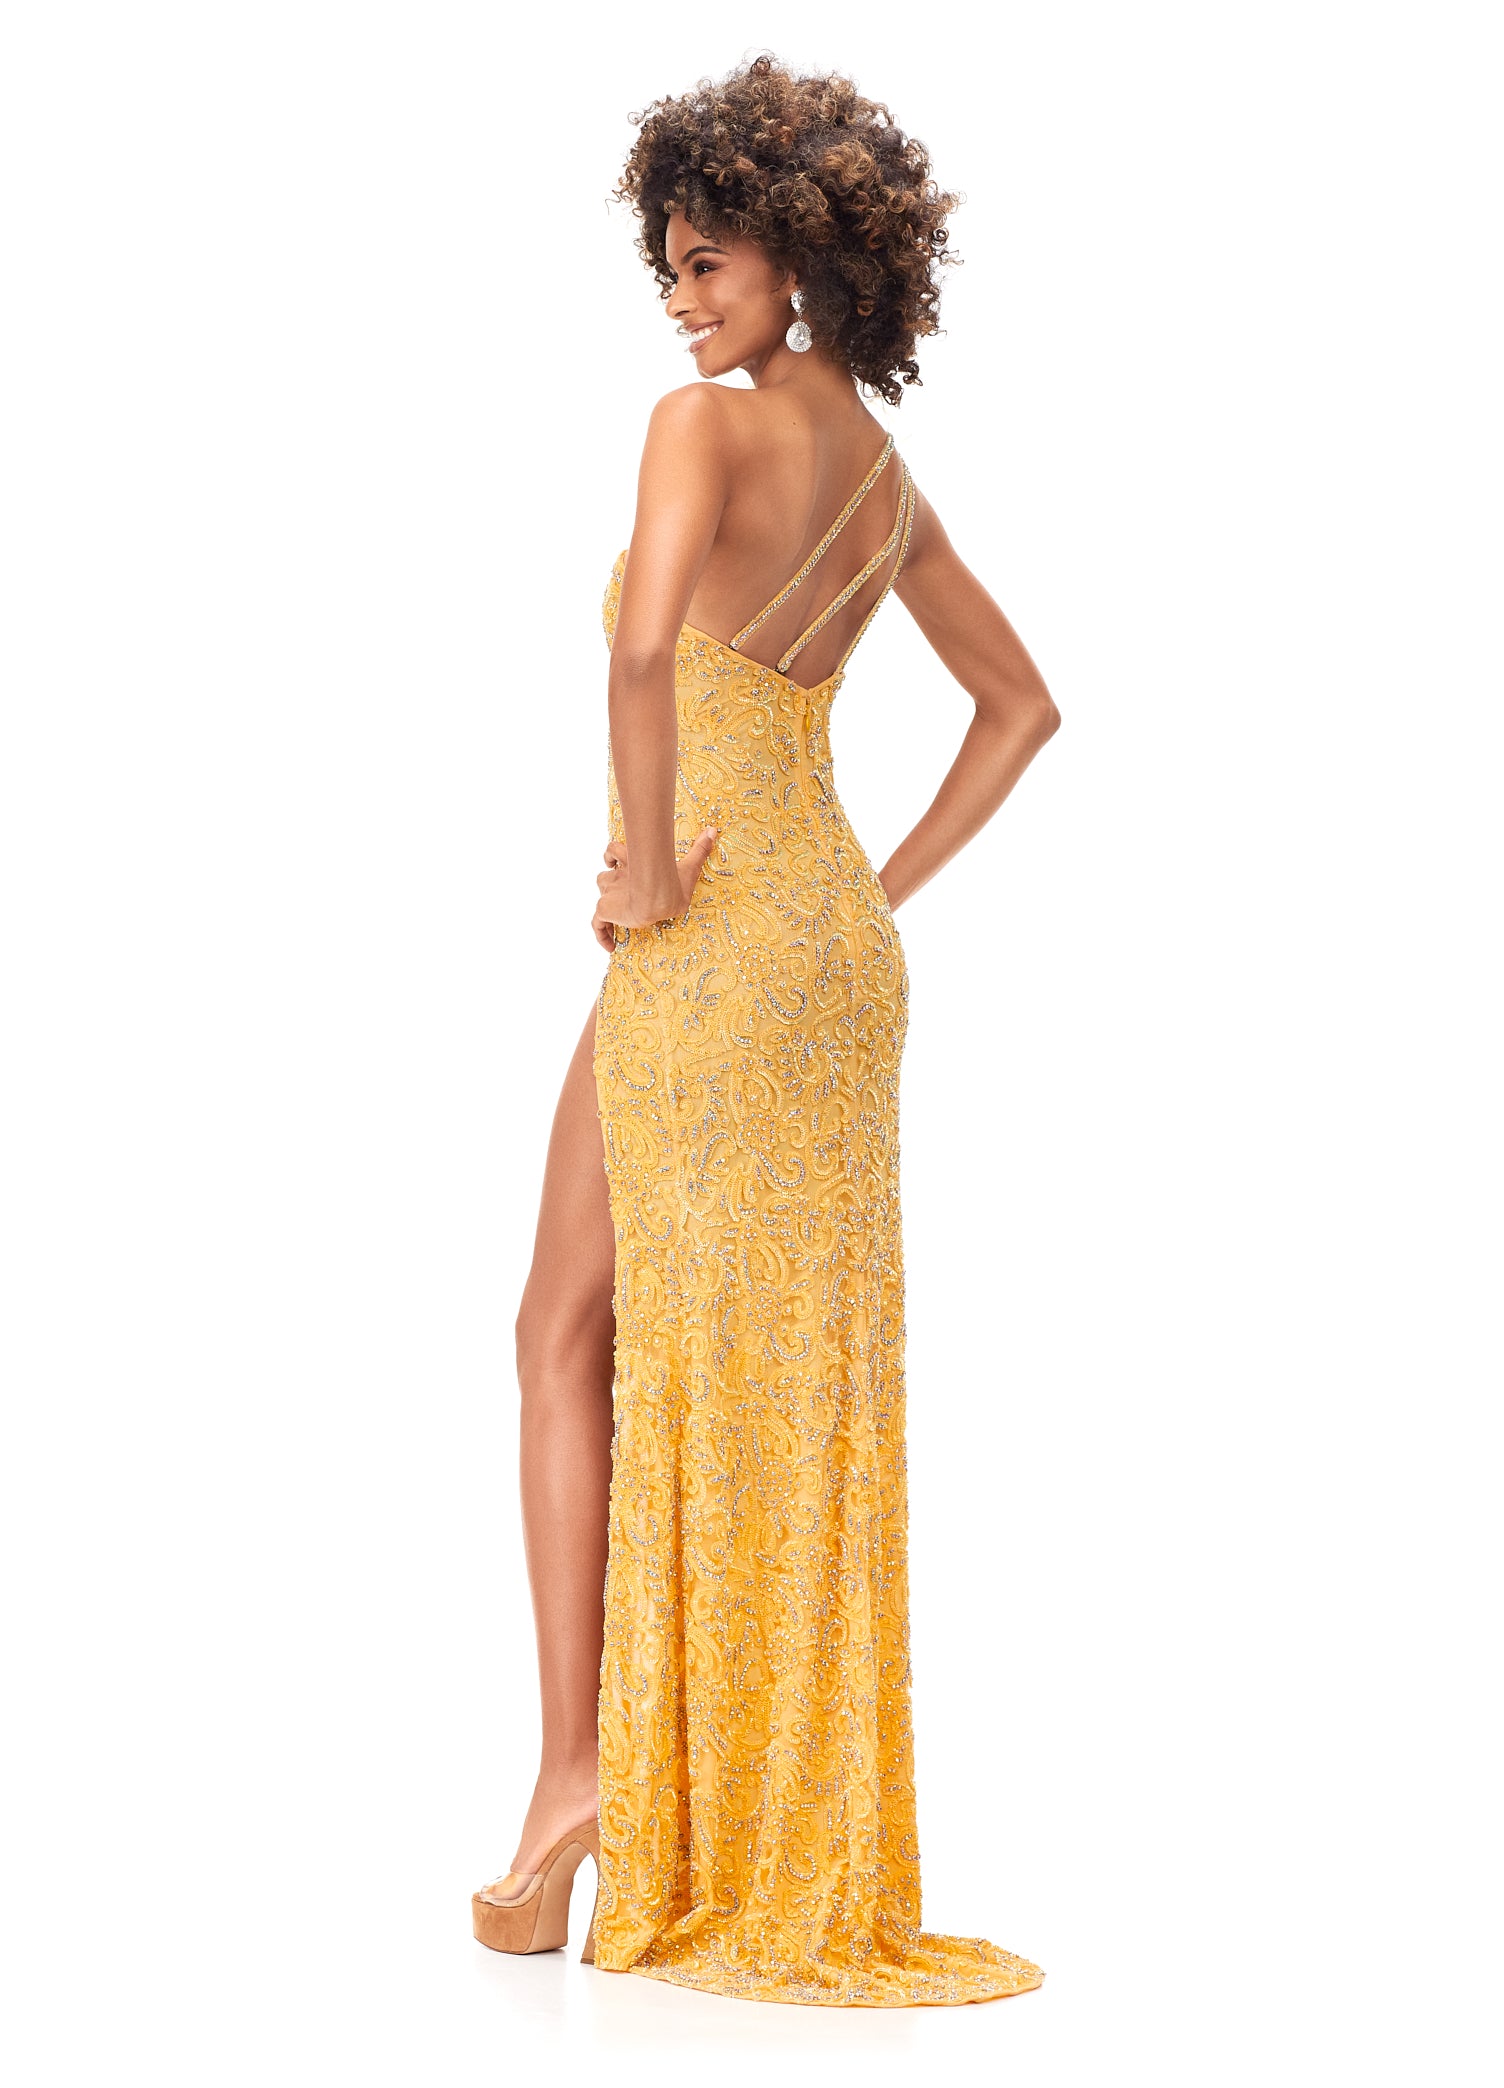 Ashley Lauren 11277 We are obsessing over this gown! This gorgeous one shoulder gown features crystals and beading throughout the bodice and carries onto the skirt. The one shoulder neckline is accented with feathers. The look is complete with a left leg slit and strappy open back. One Shoulder Intricate Sequin & Crystal Beading Left Leg Slit yellow